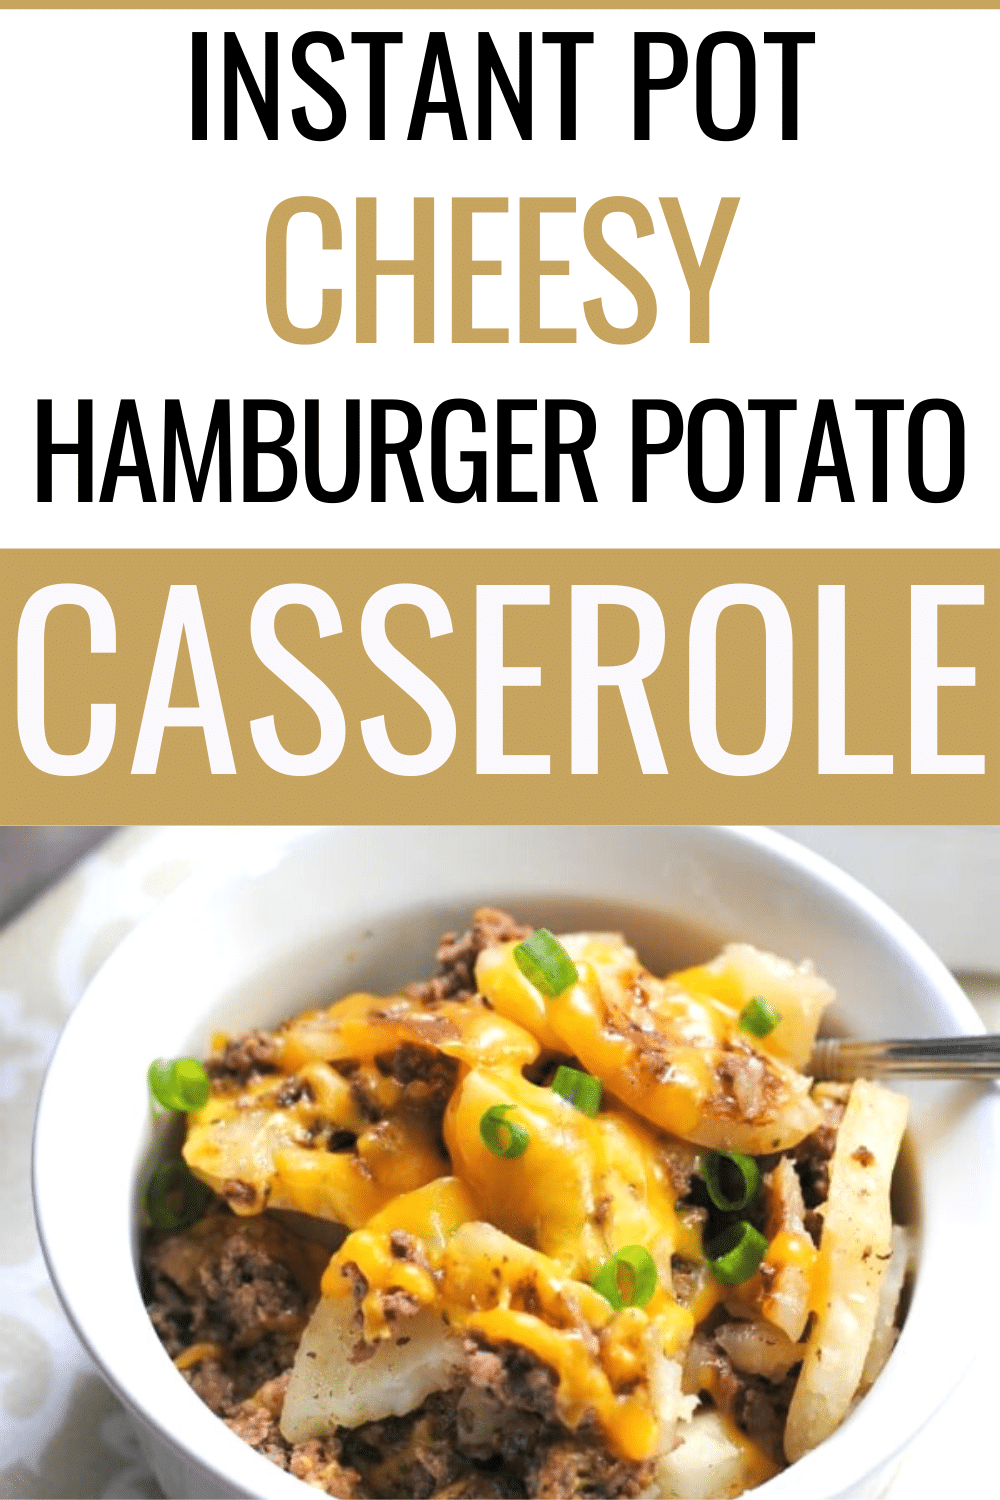 This Instant Pot Cheesy Hamburger Potato Casserole is a family favorite! Super easy, kids love it, and very hearty. #instantpot #easydinner #casserole via @wondermomwannab